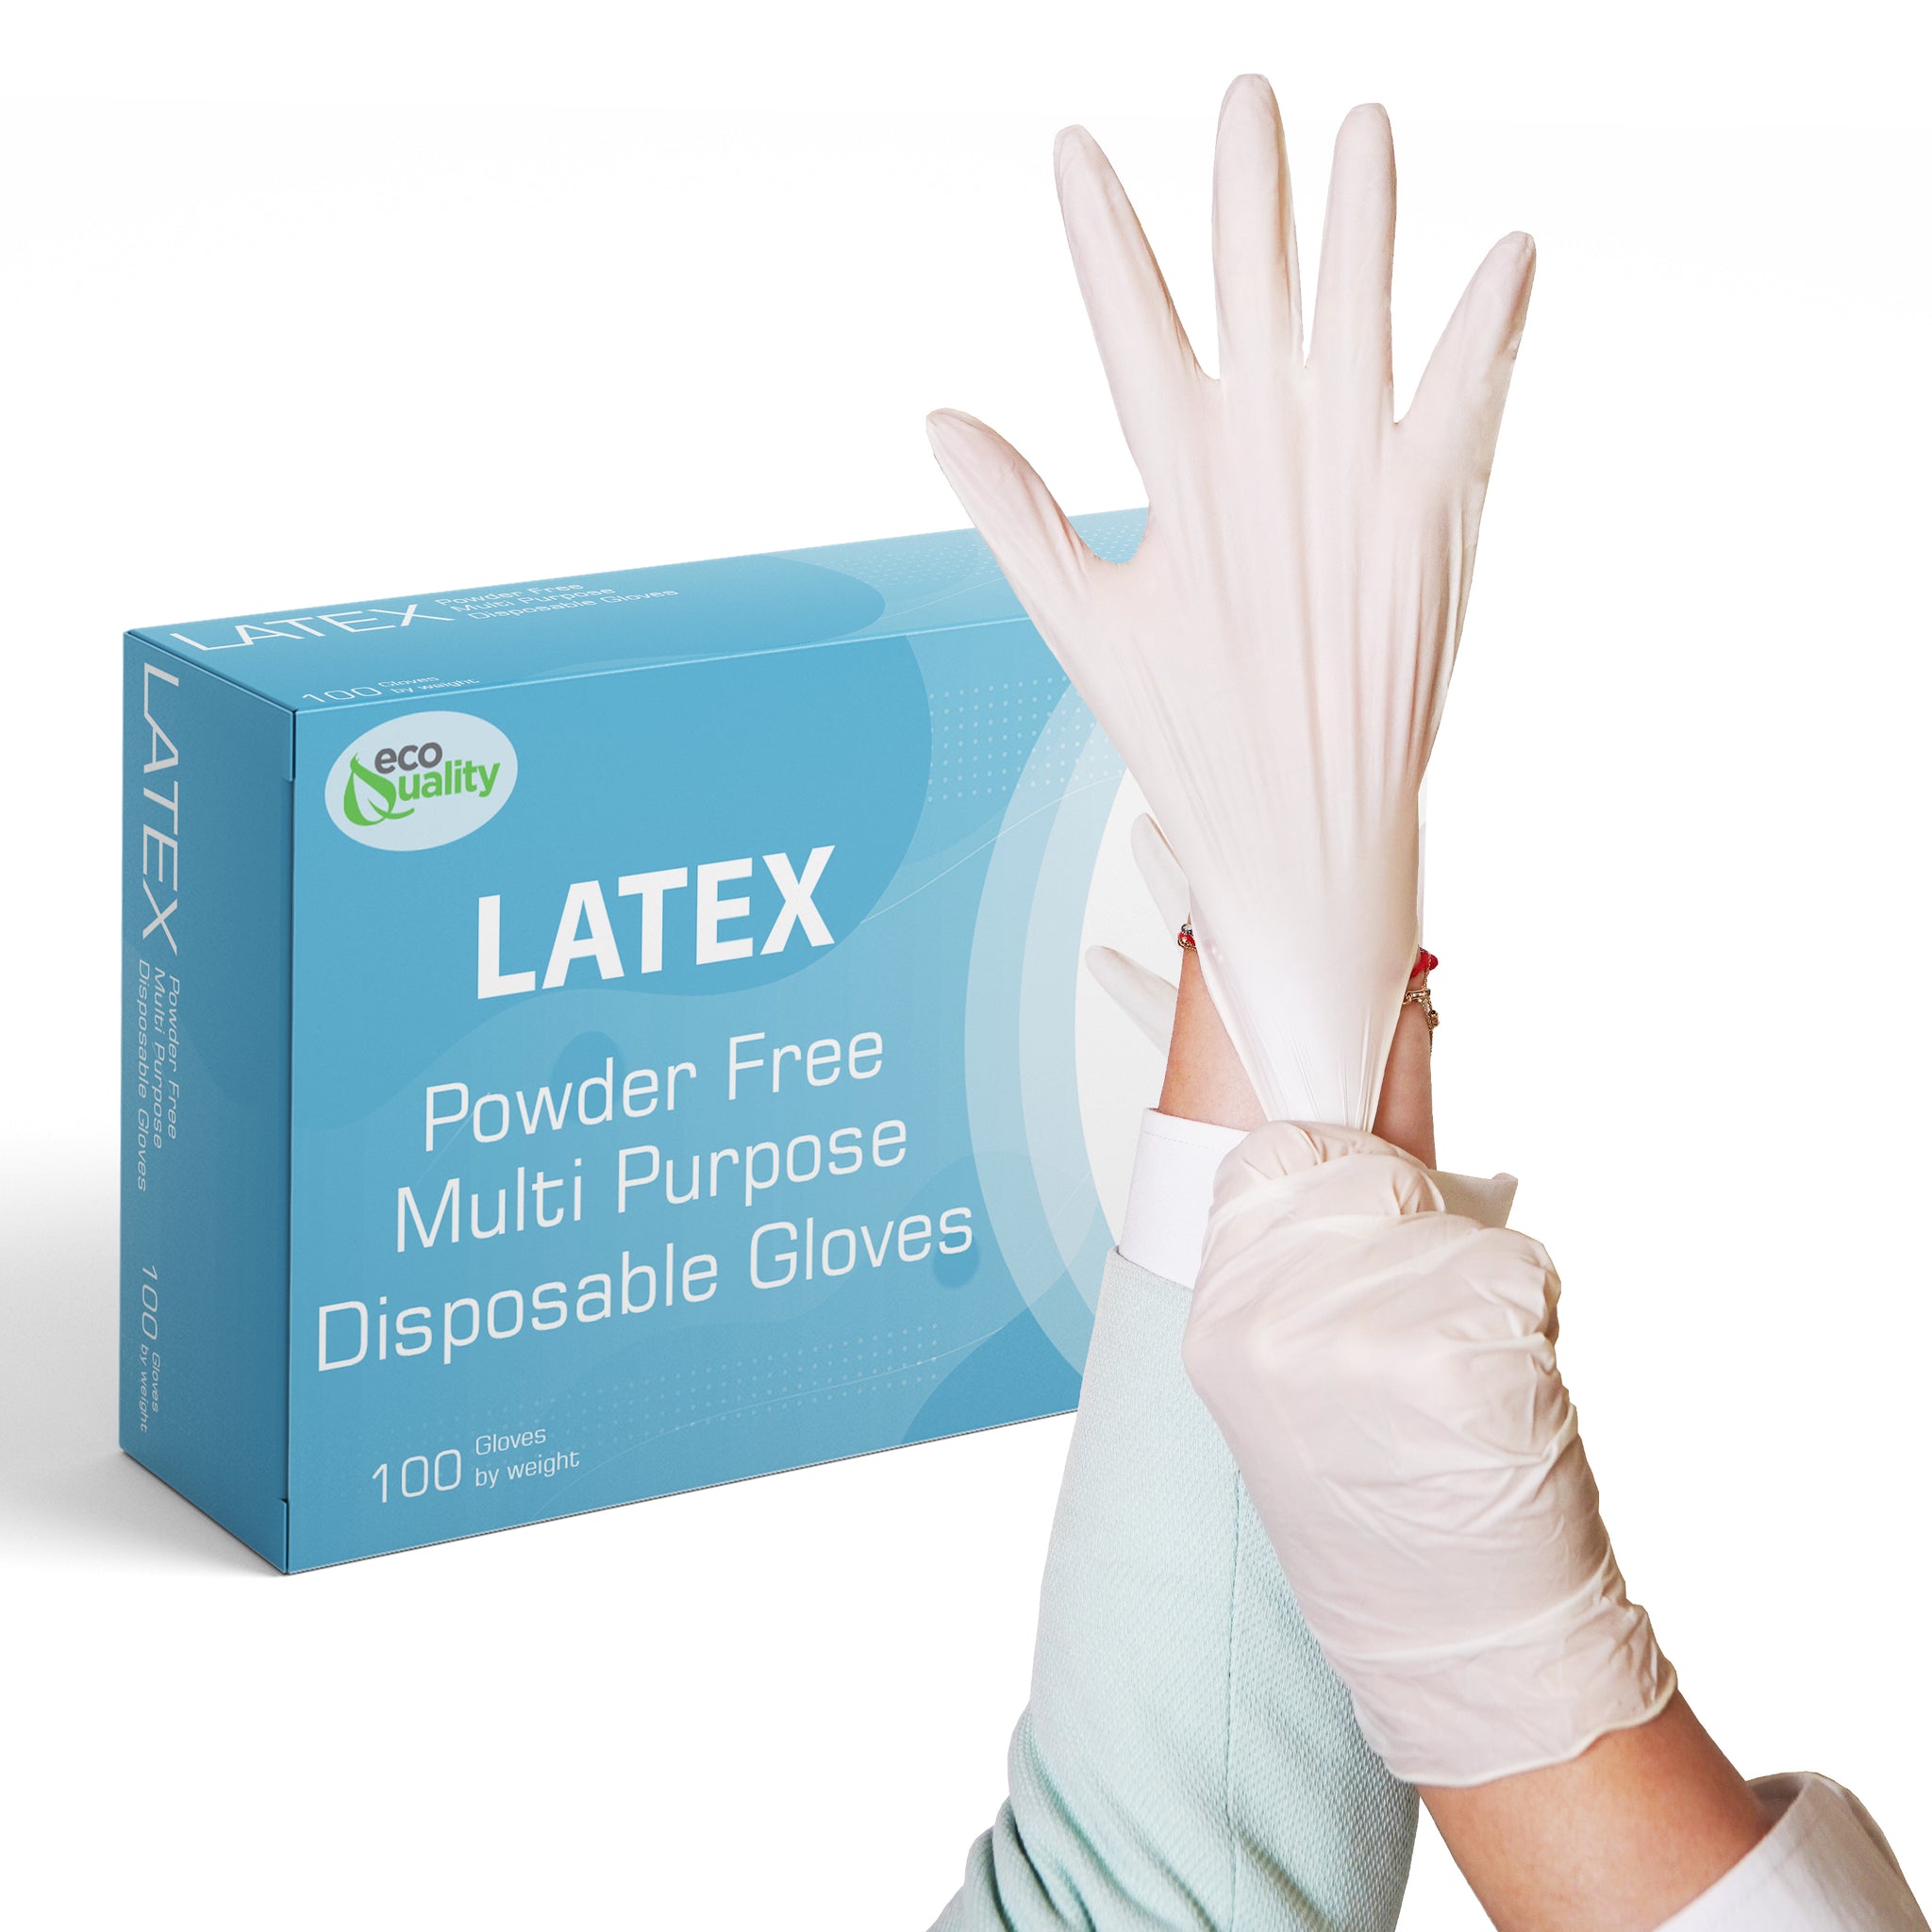 Hotel Commercial Wholesale Gloves  White Clear Gloves  stretchable durability and puncture resistance  Plastic Gloves  Latex Powder Free Gloves  Gloves  Food Service Restaurant Kitchen Cleaning Janitorial Gloves  Food Grade Gloves  Food Gloves  Disposable Plastic Gloves  Disposable Gloves  5 mil White Clear small